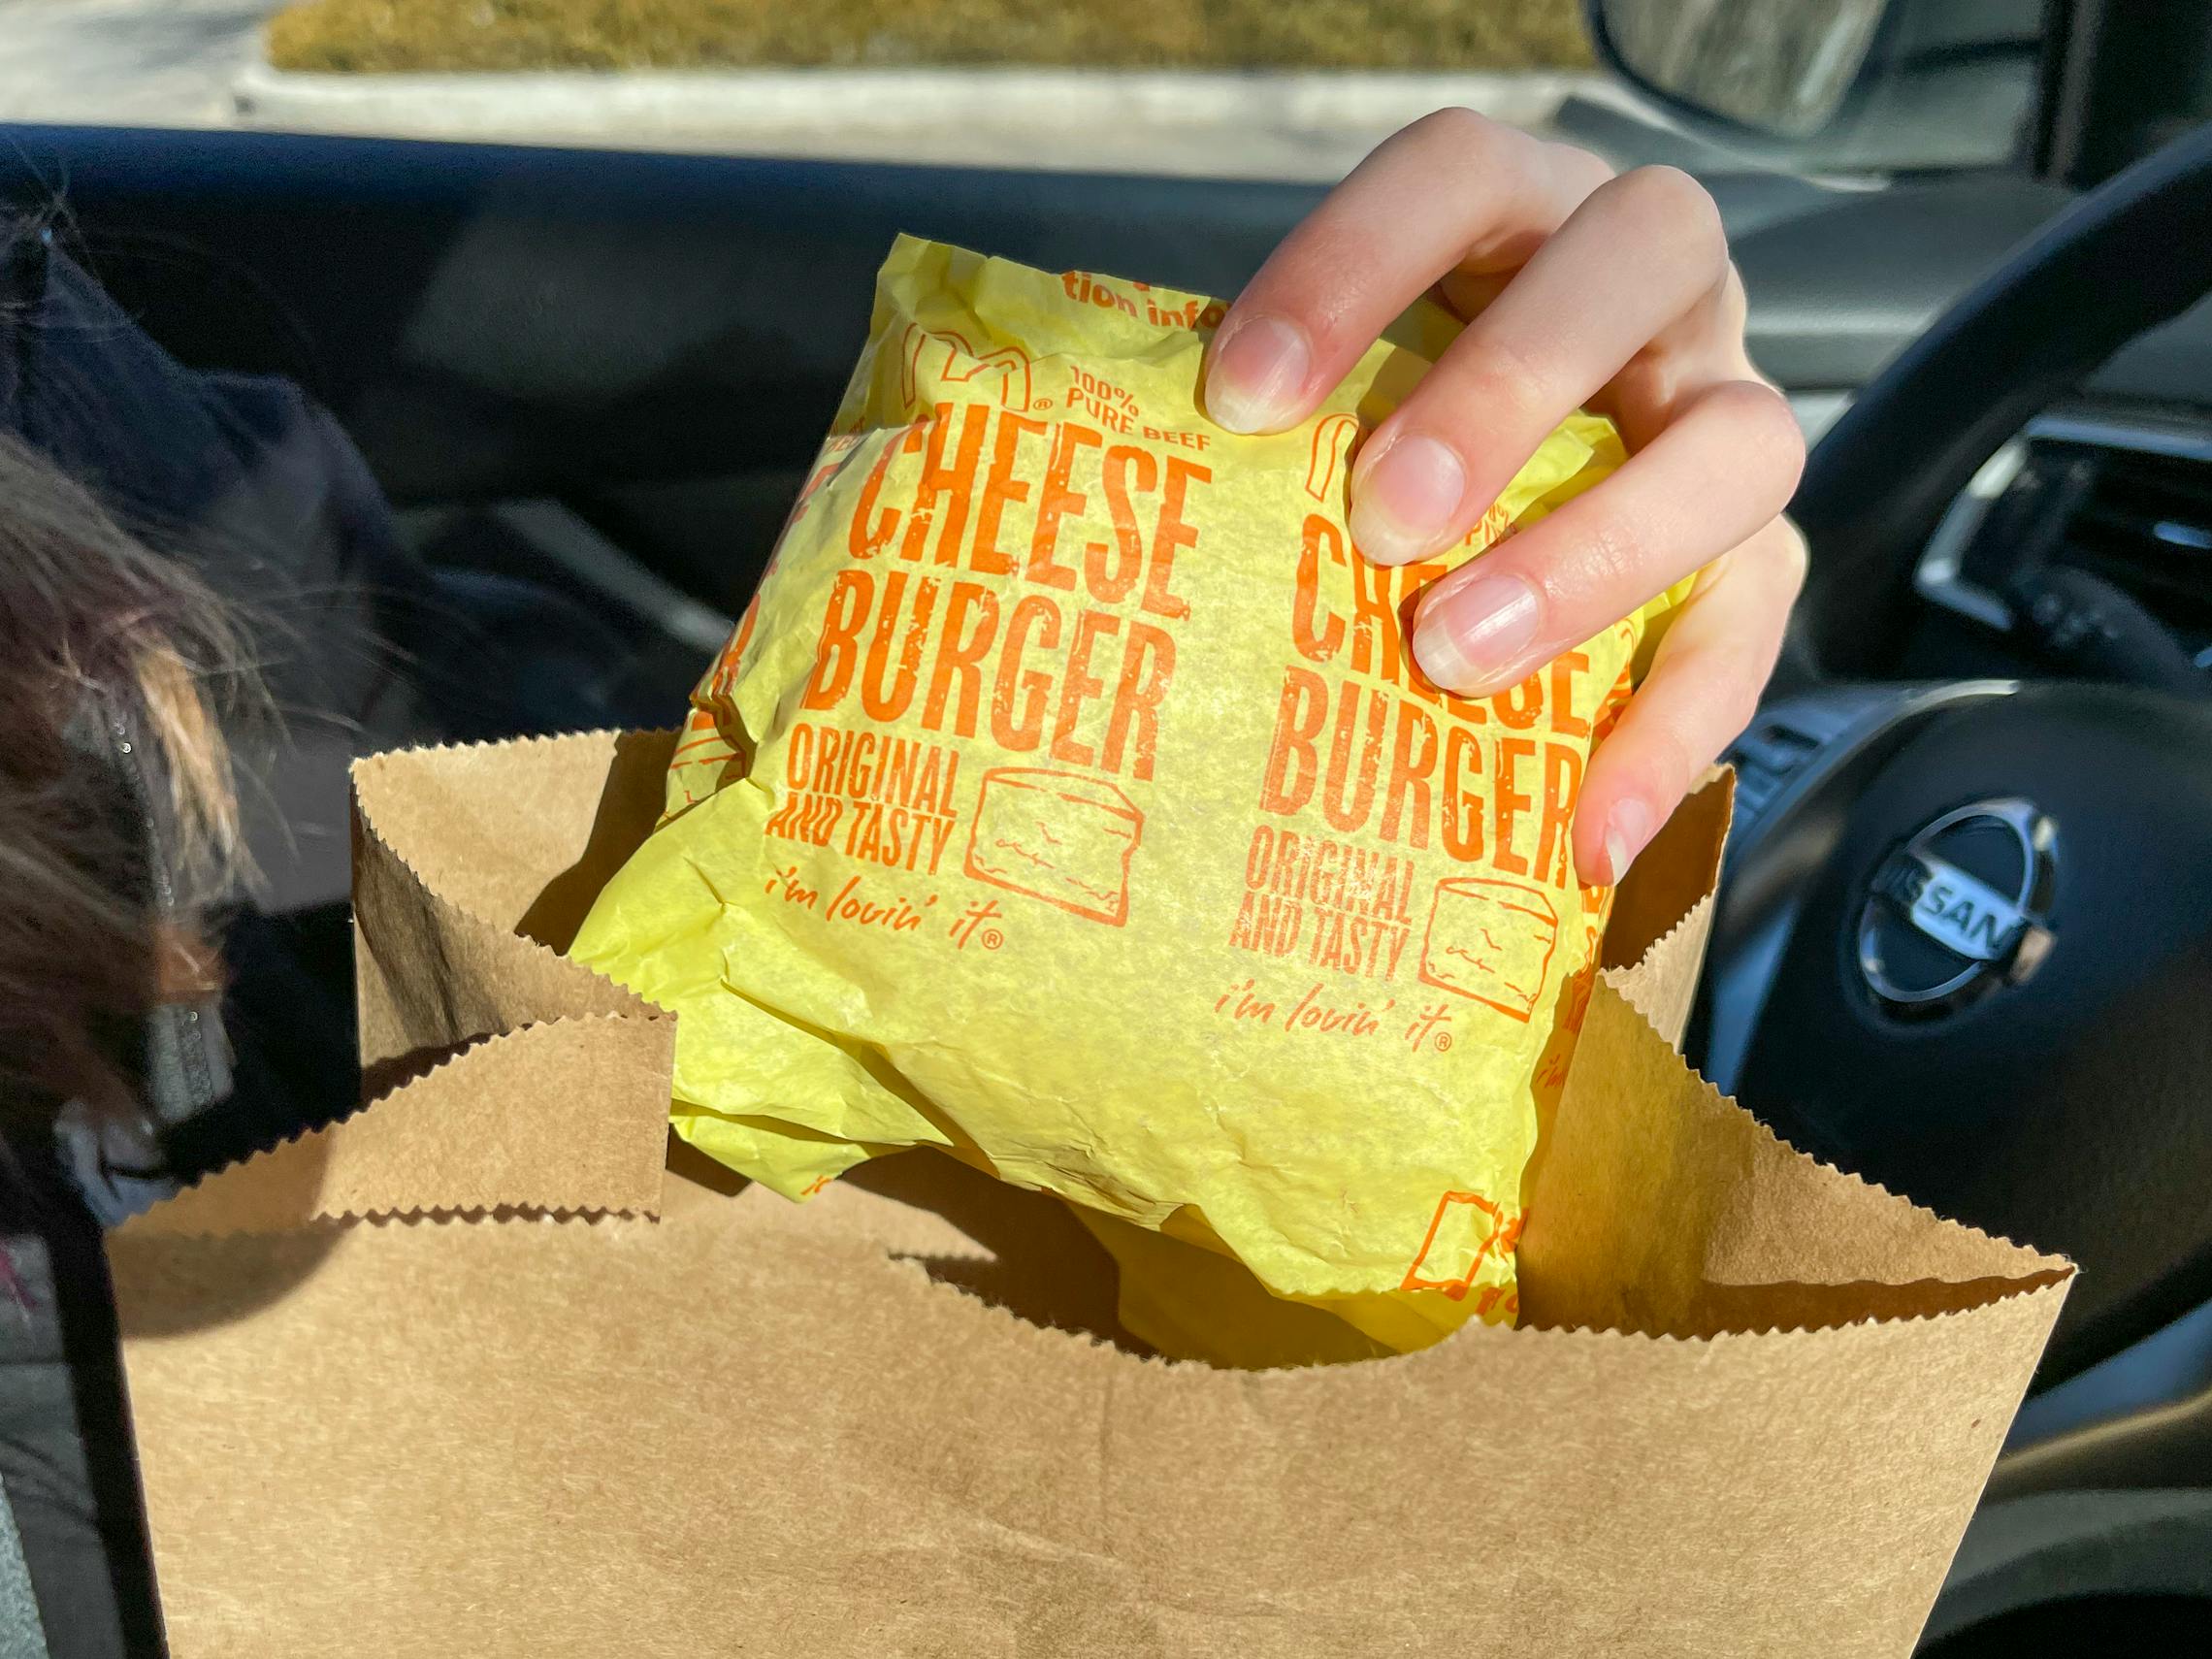 A person pulling a wrapped McDonald's cheeseburger out of a McDonald's bag while sitting in their car.